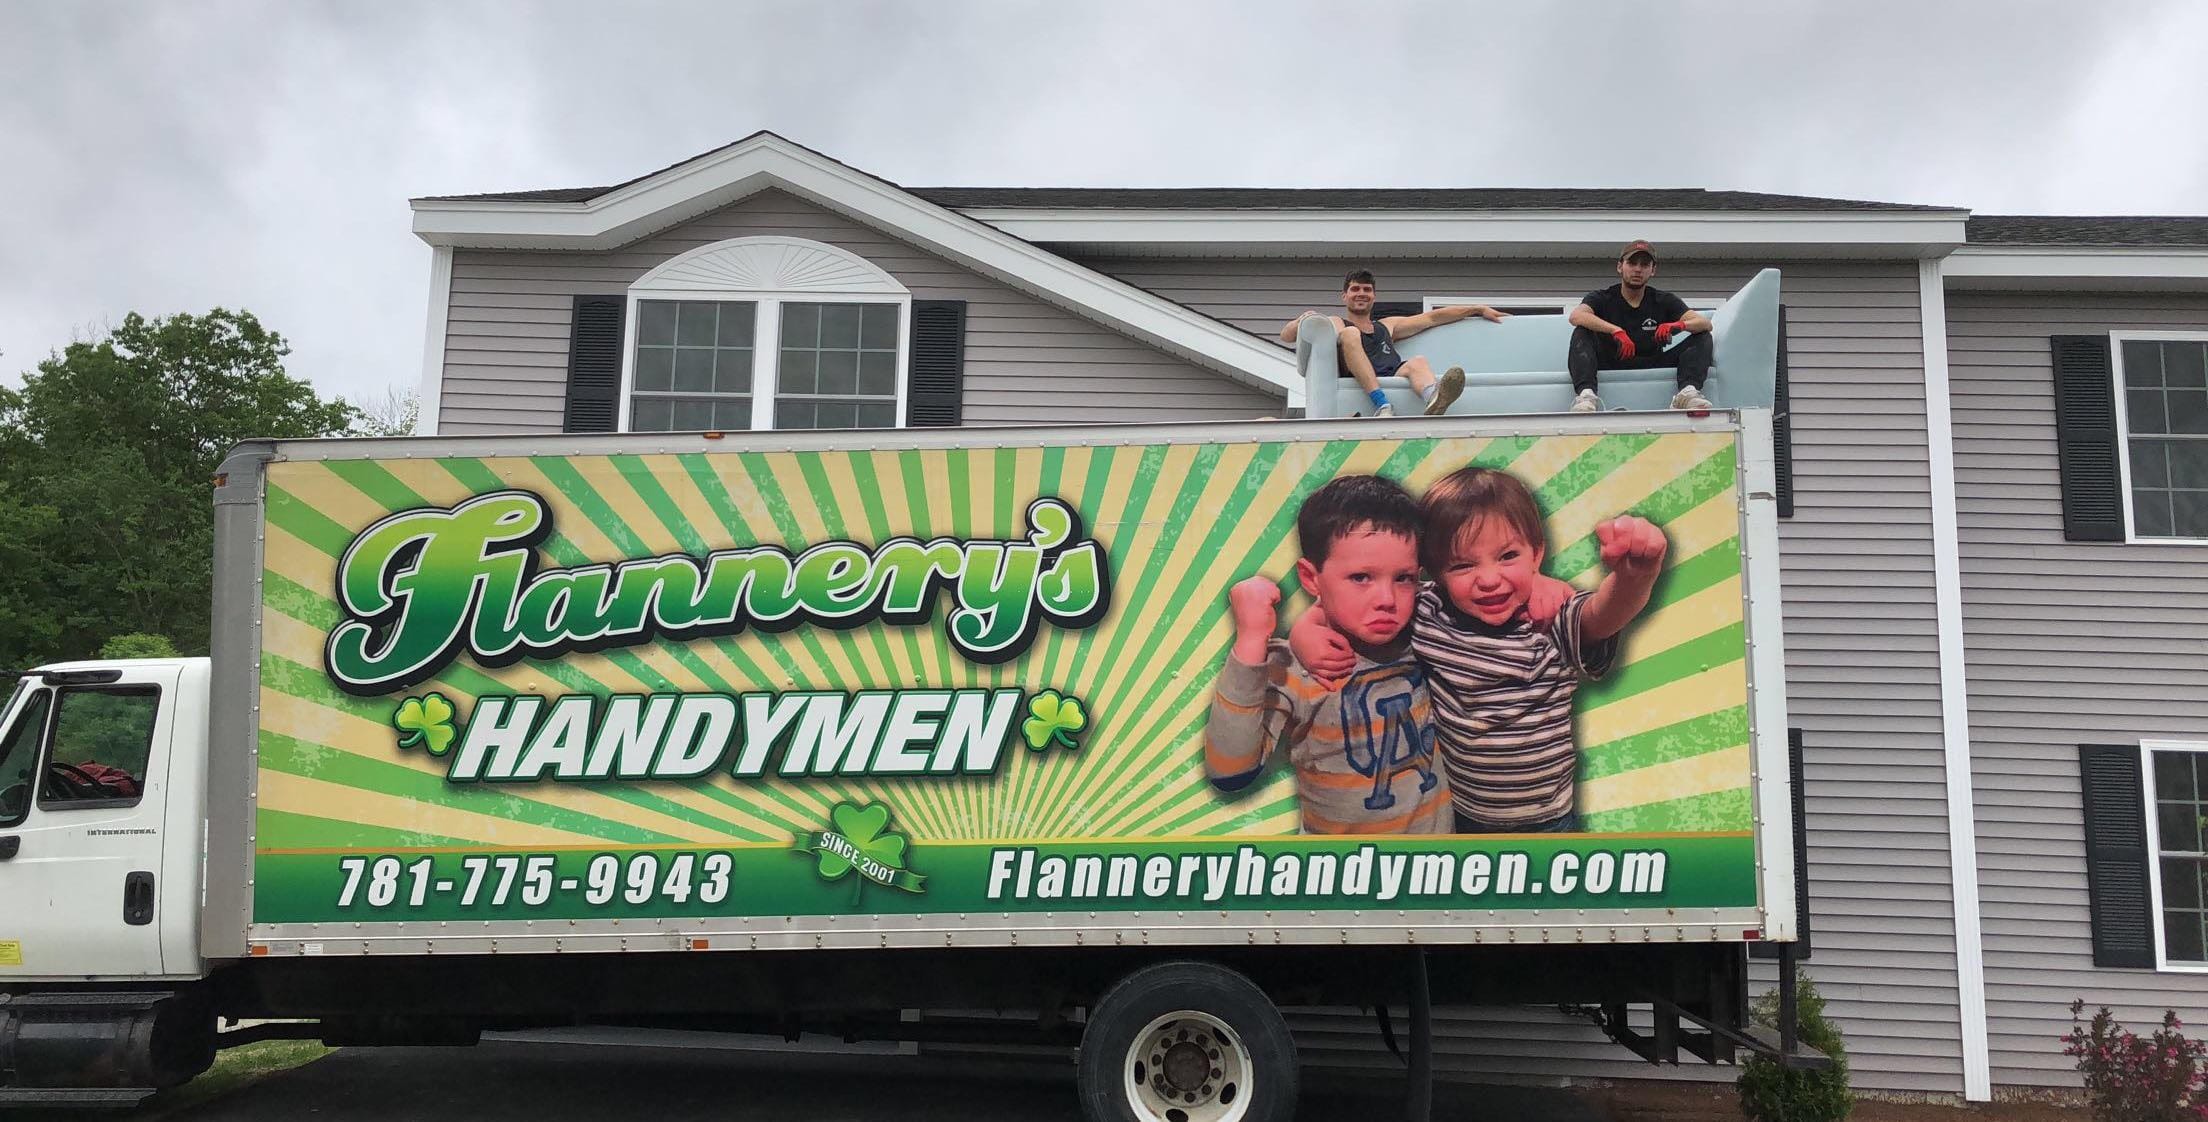 Flannery's Handymen truck with movers sitting on top on a couch